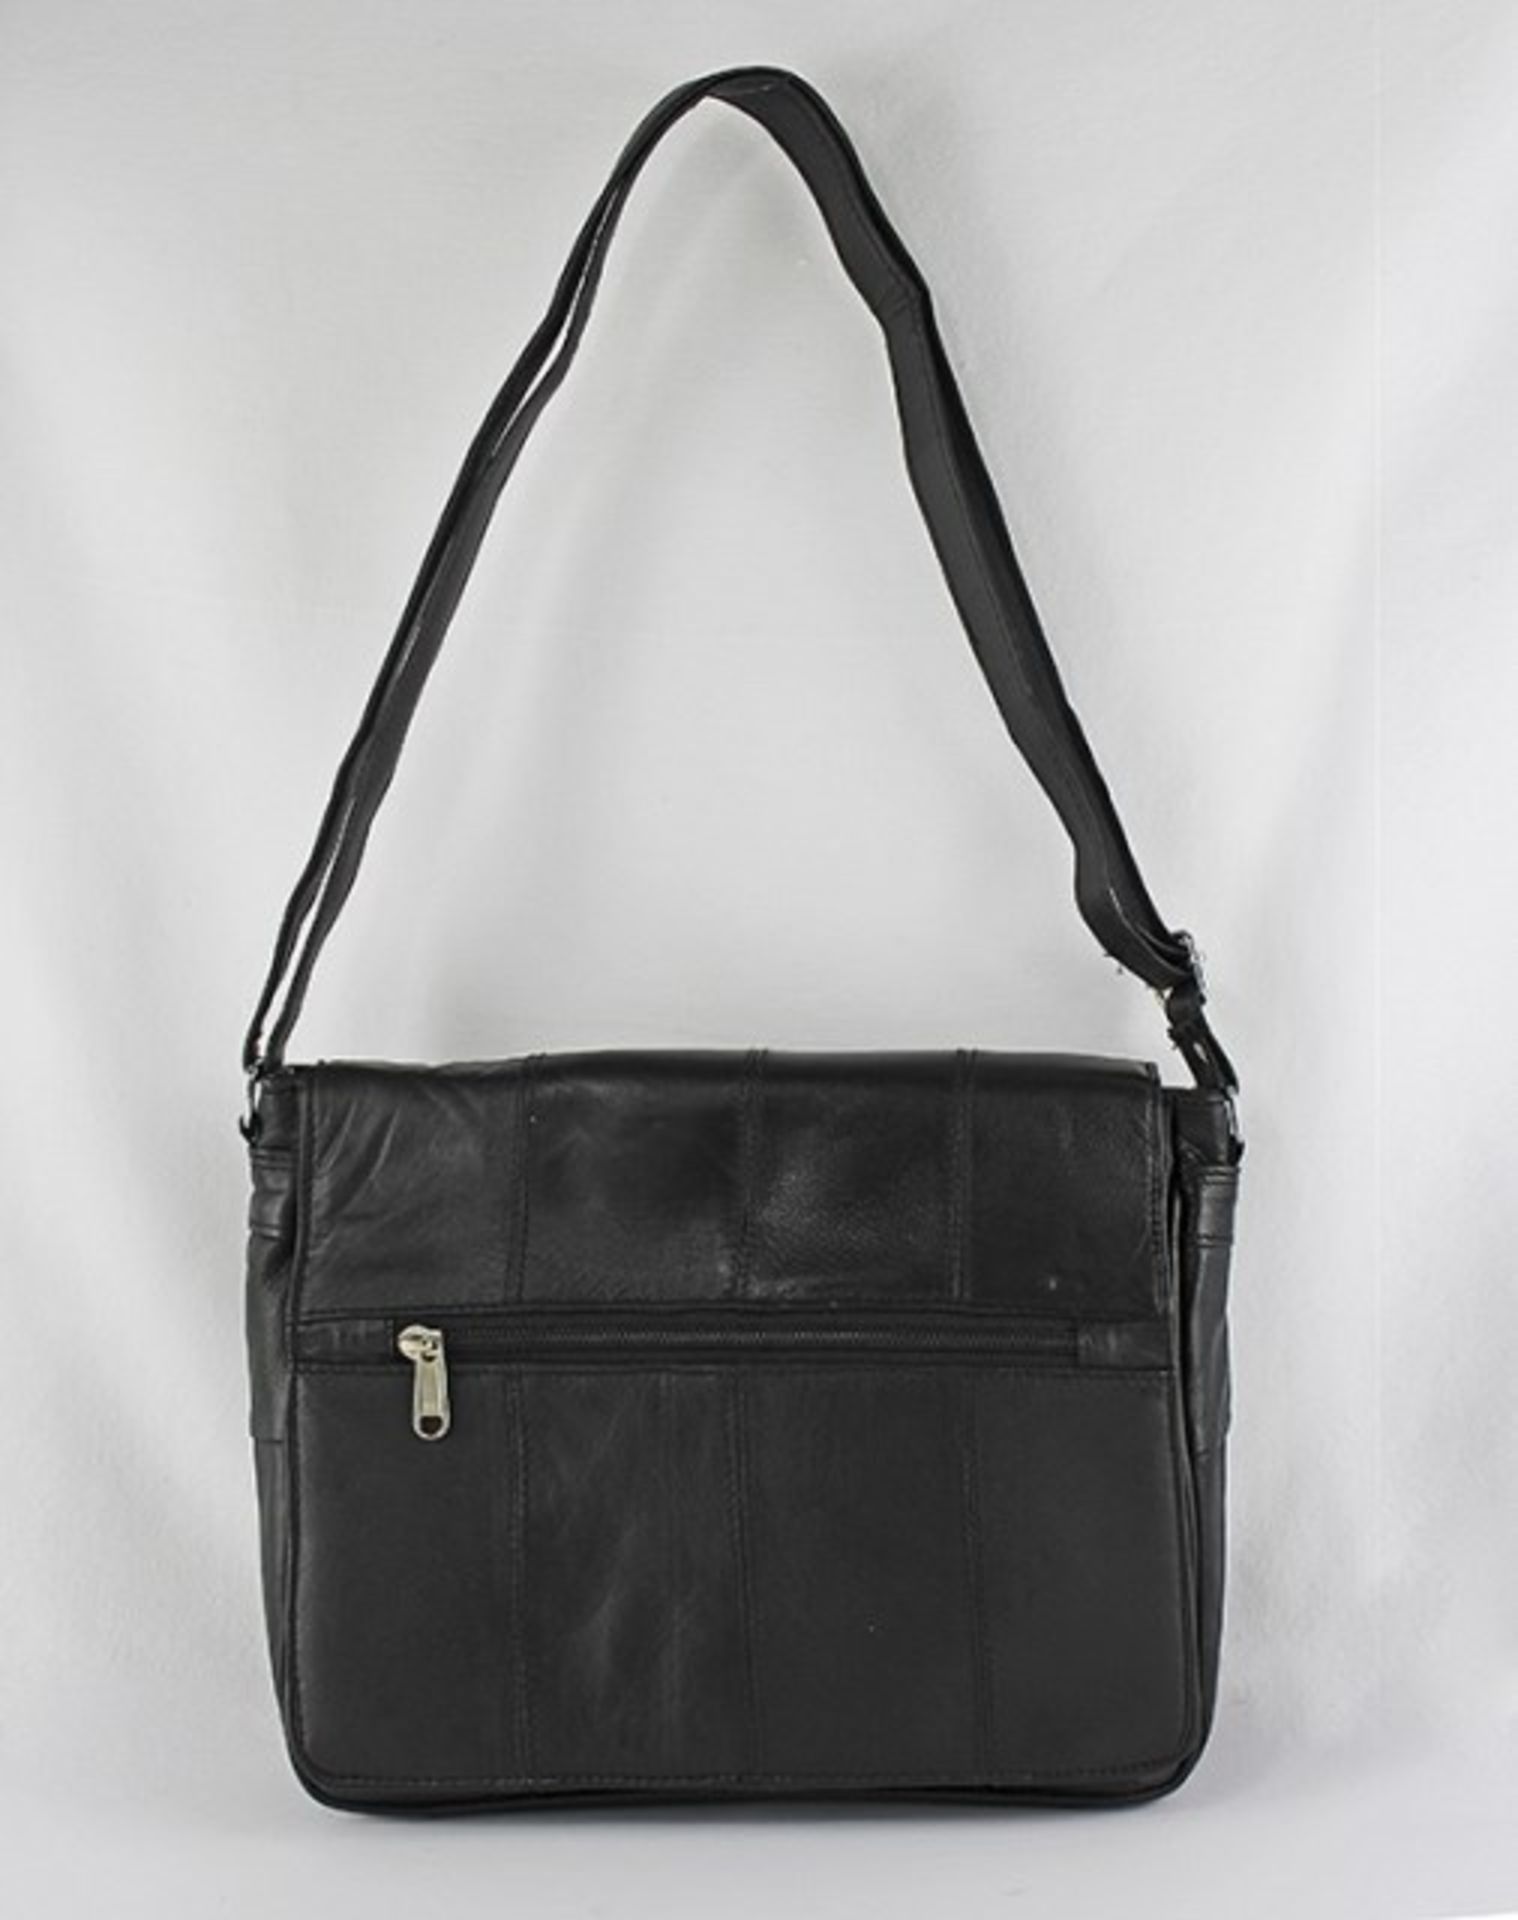 Grade A Ladies Leather Black Panel Shoulder Bag X 2 YOUR BID PRICE TO BE MULTIPLIED BY TWO